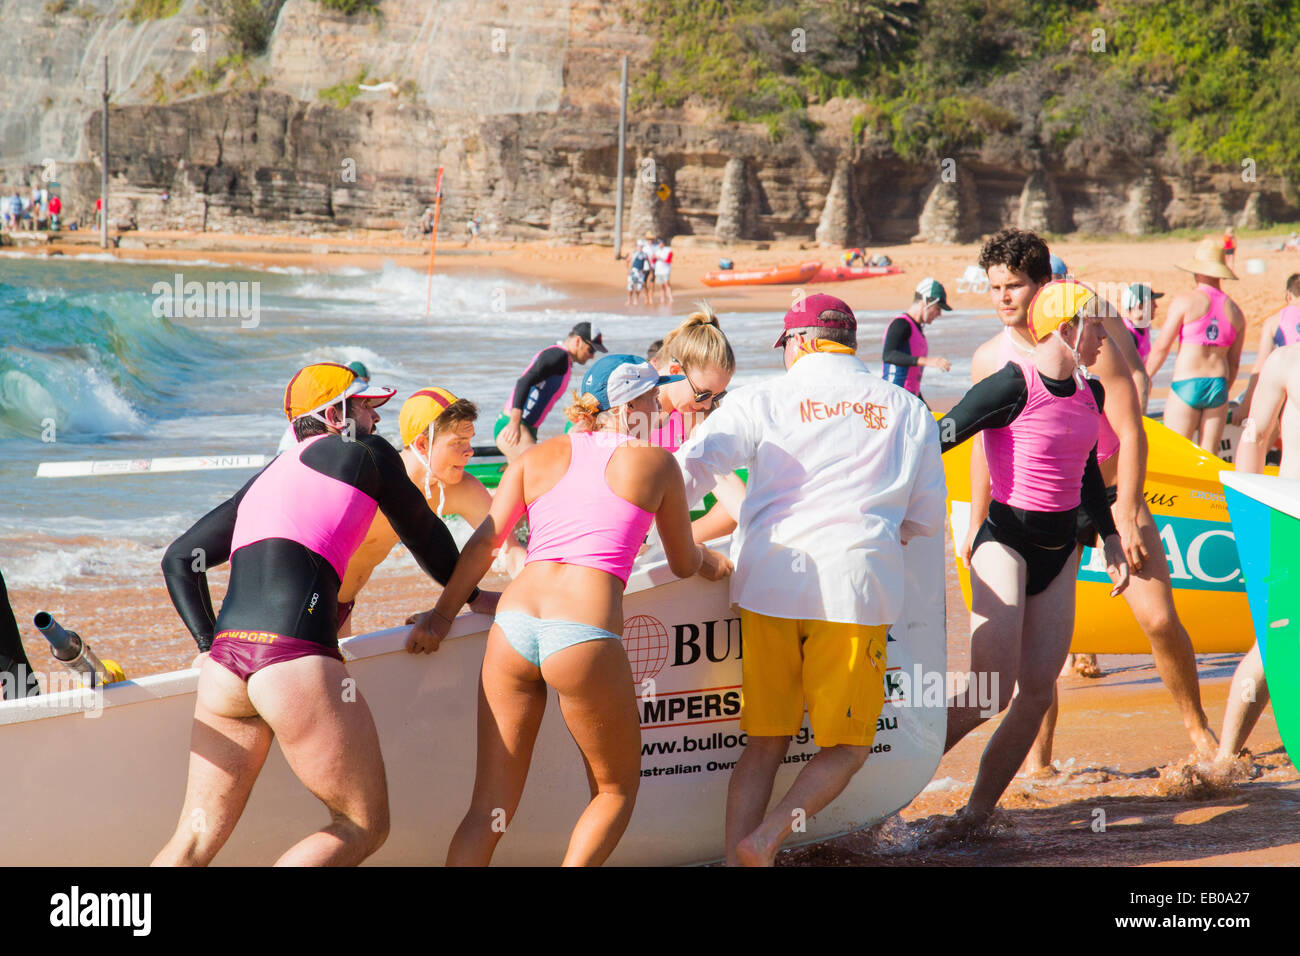 Summer surfboat racing carnival competition amongst surfclubs located on Sydney's northern beaches begins at Bilgola Beach,Sydney,Australia Stock Photo